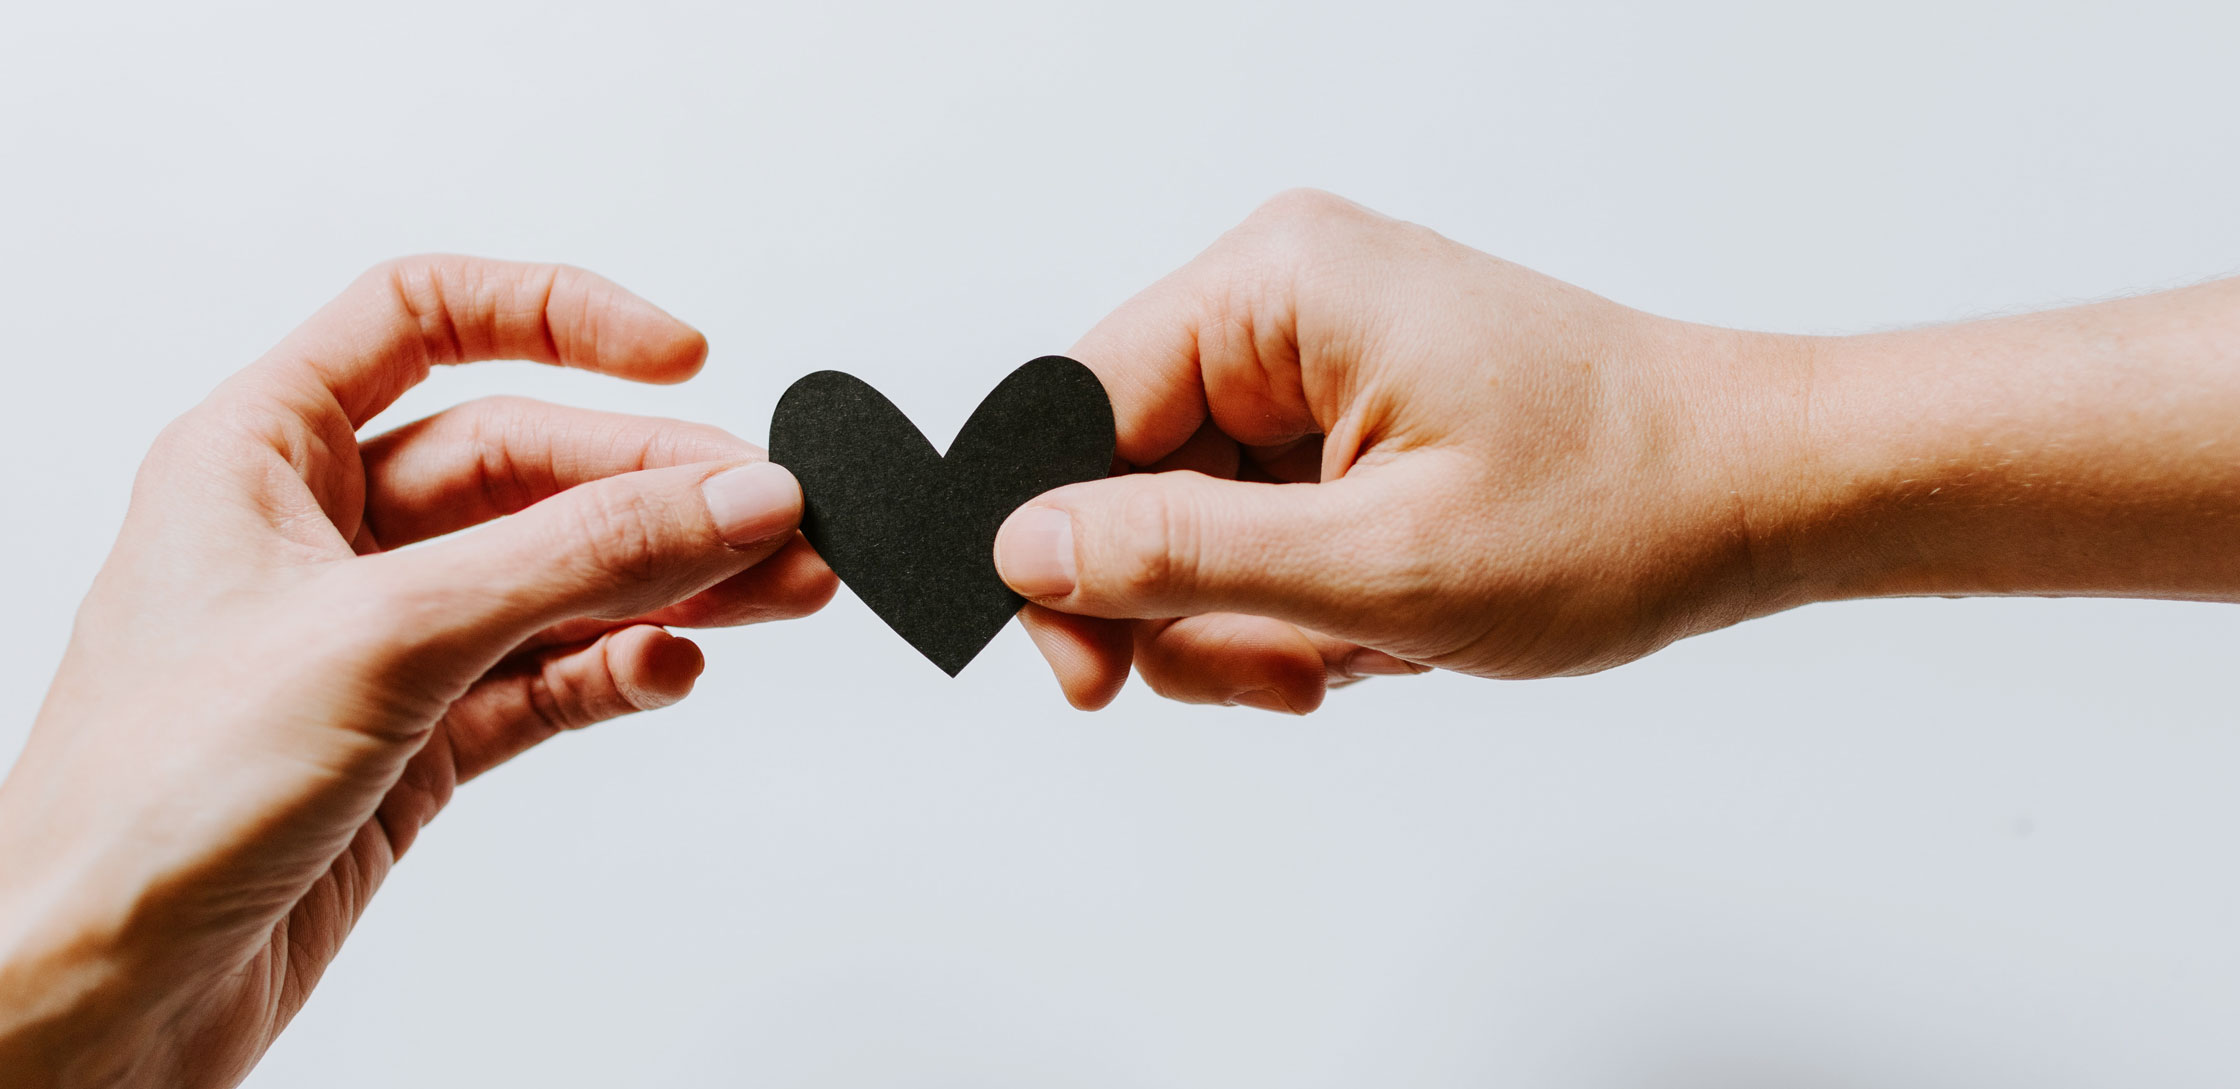 Holding black paper heart in two hands